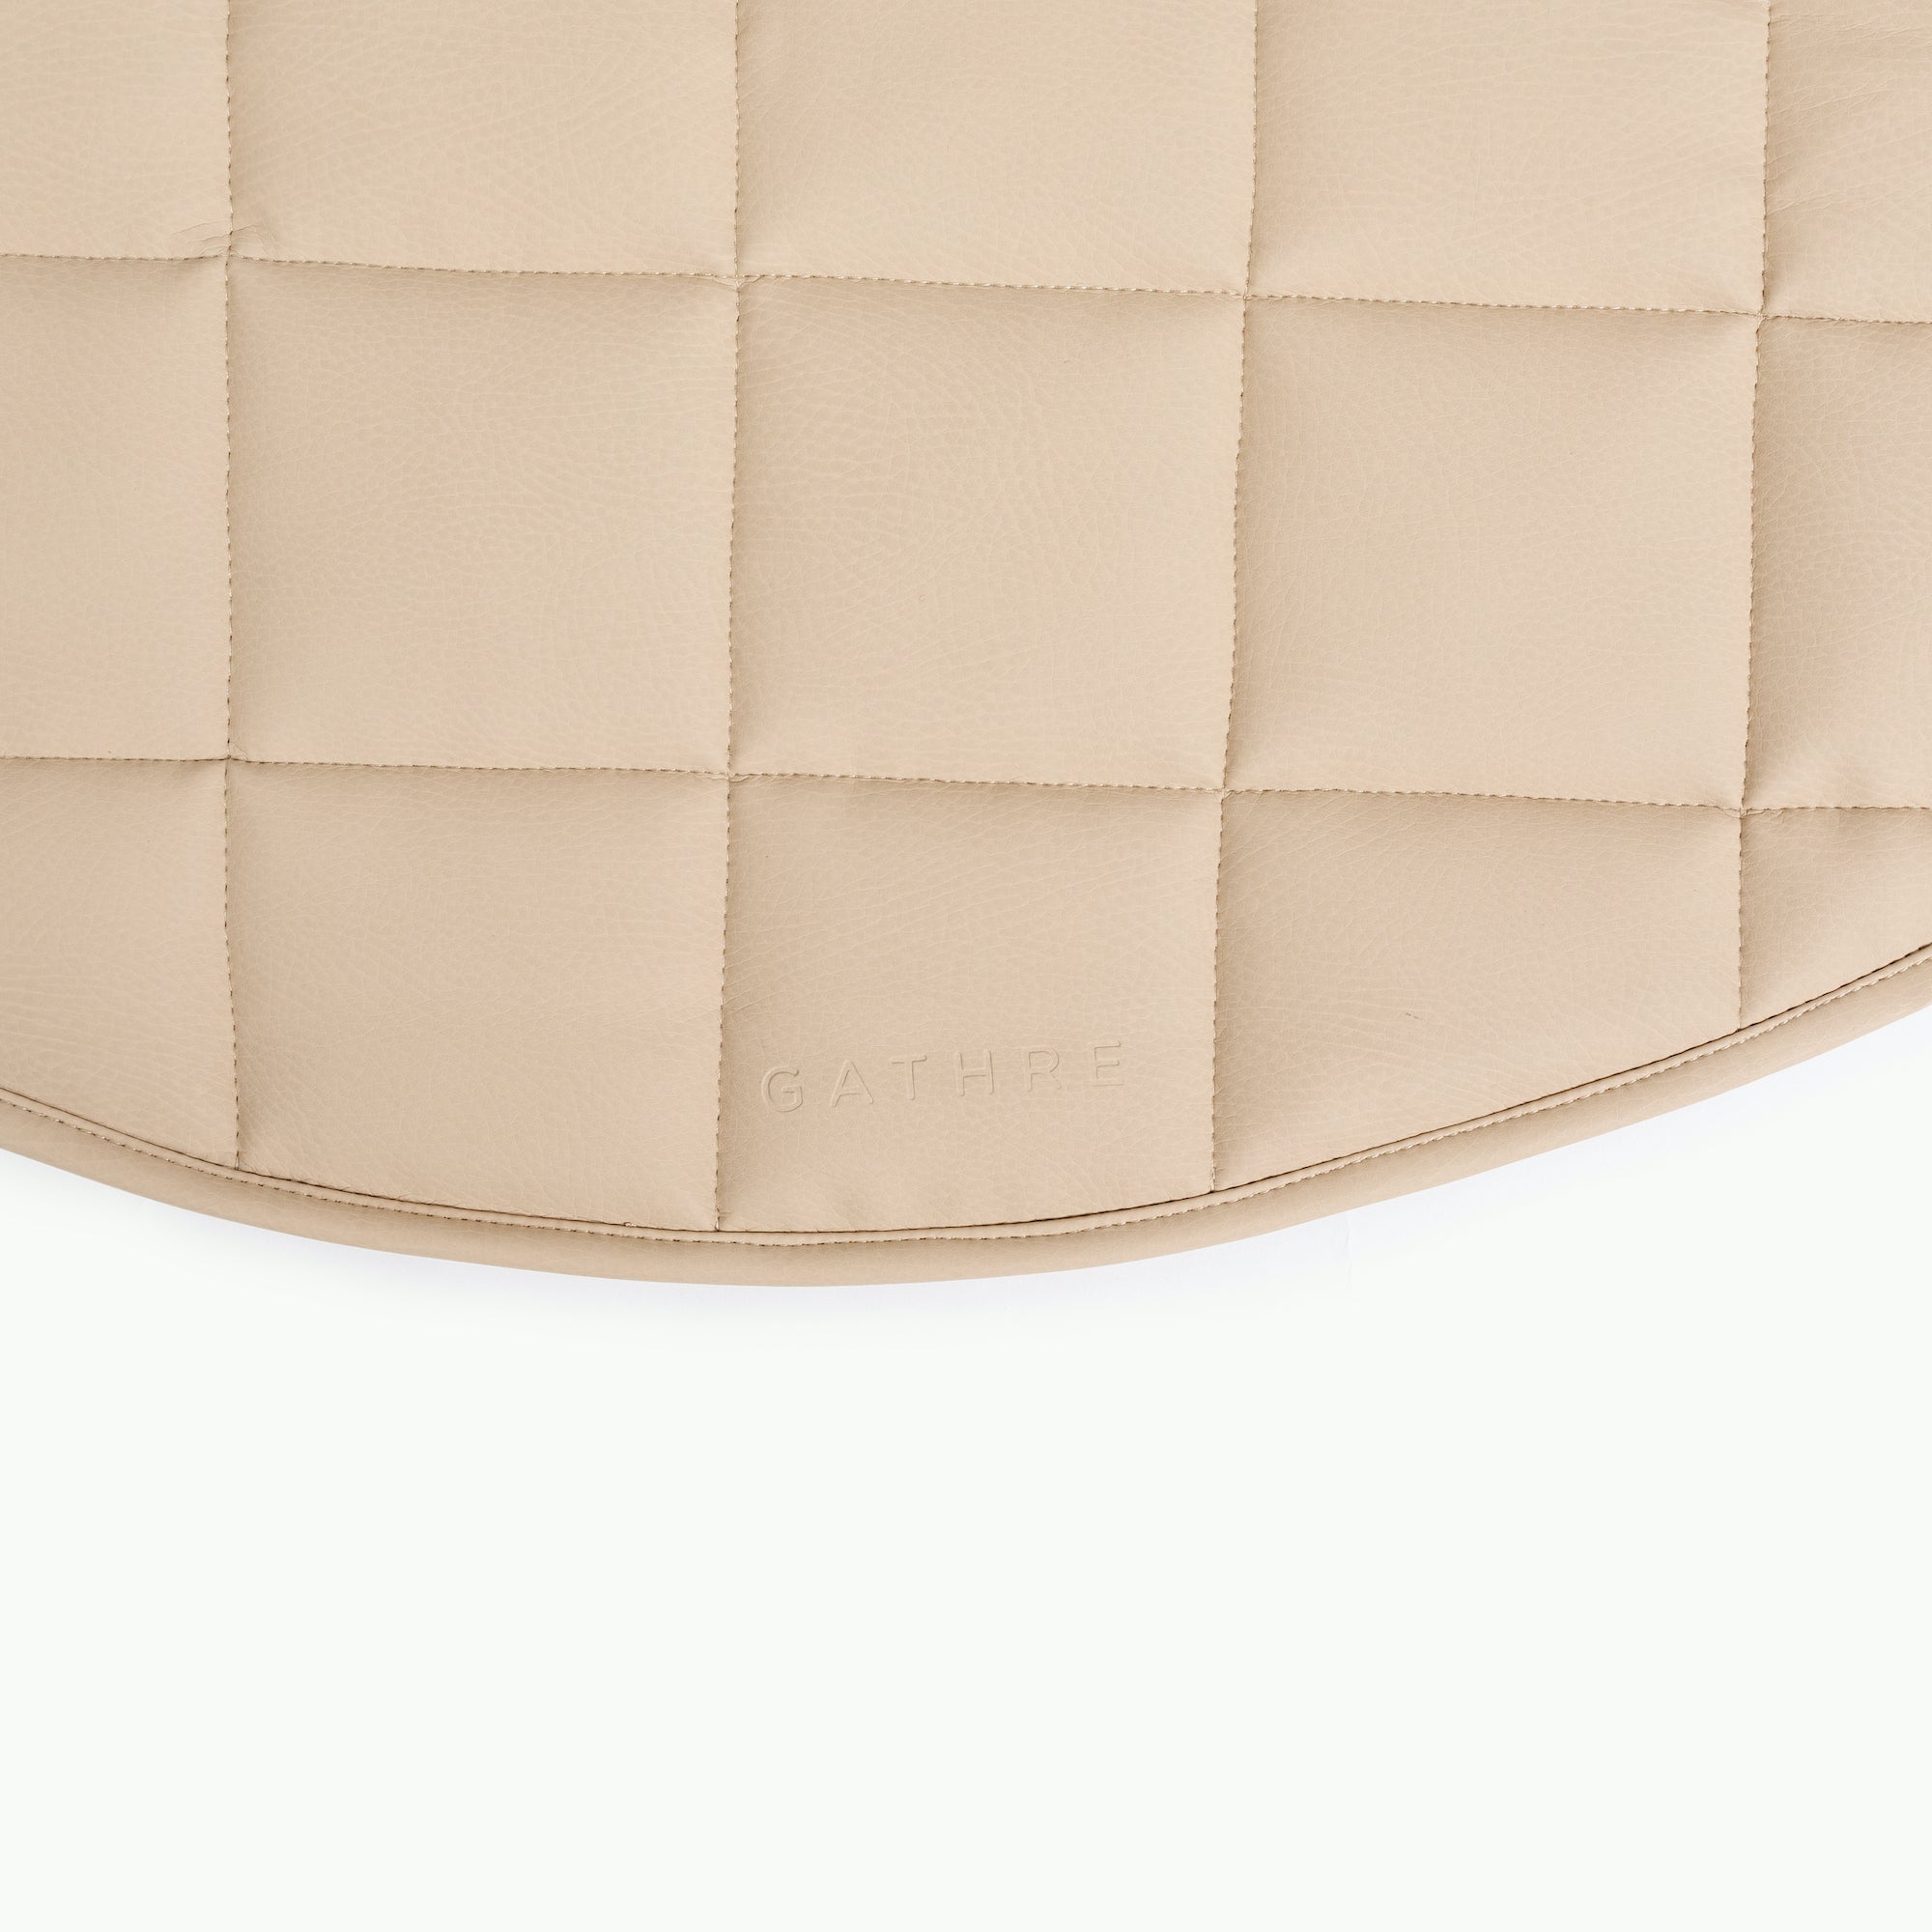 Millet / Circle@gathre deboss on the millet circle quilted mat